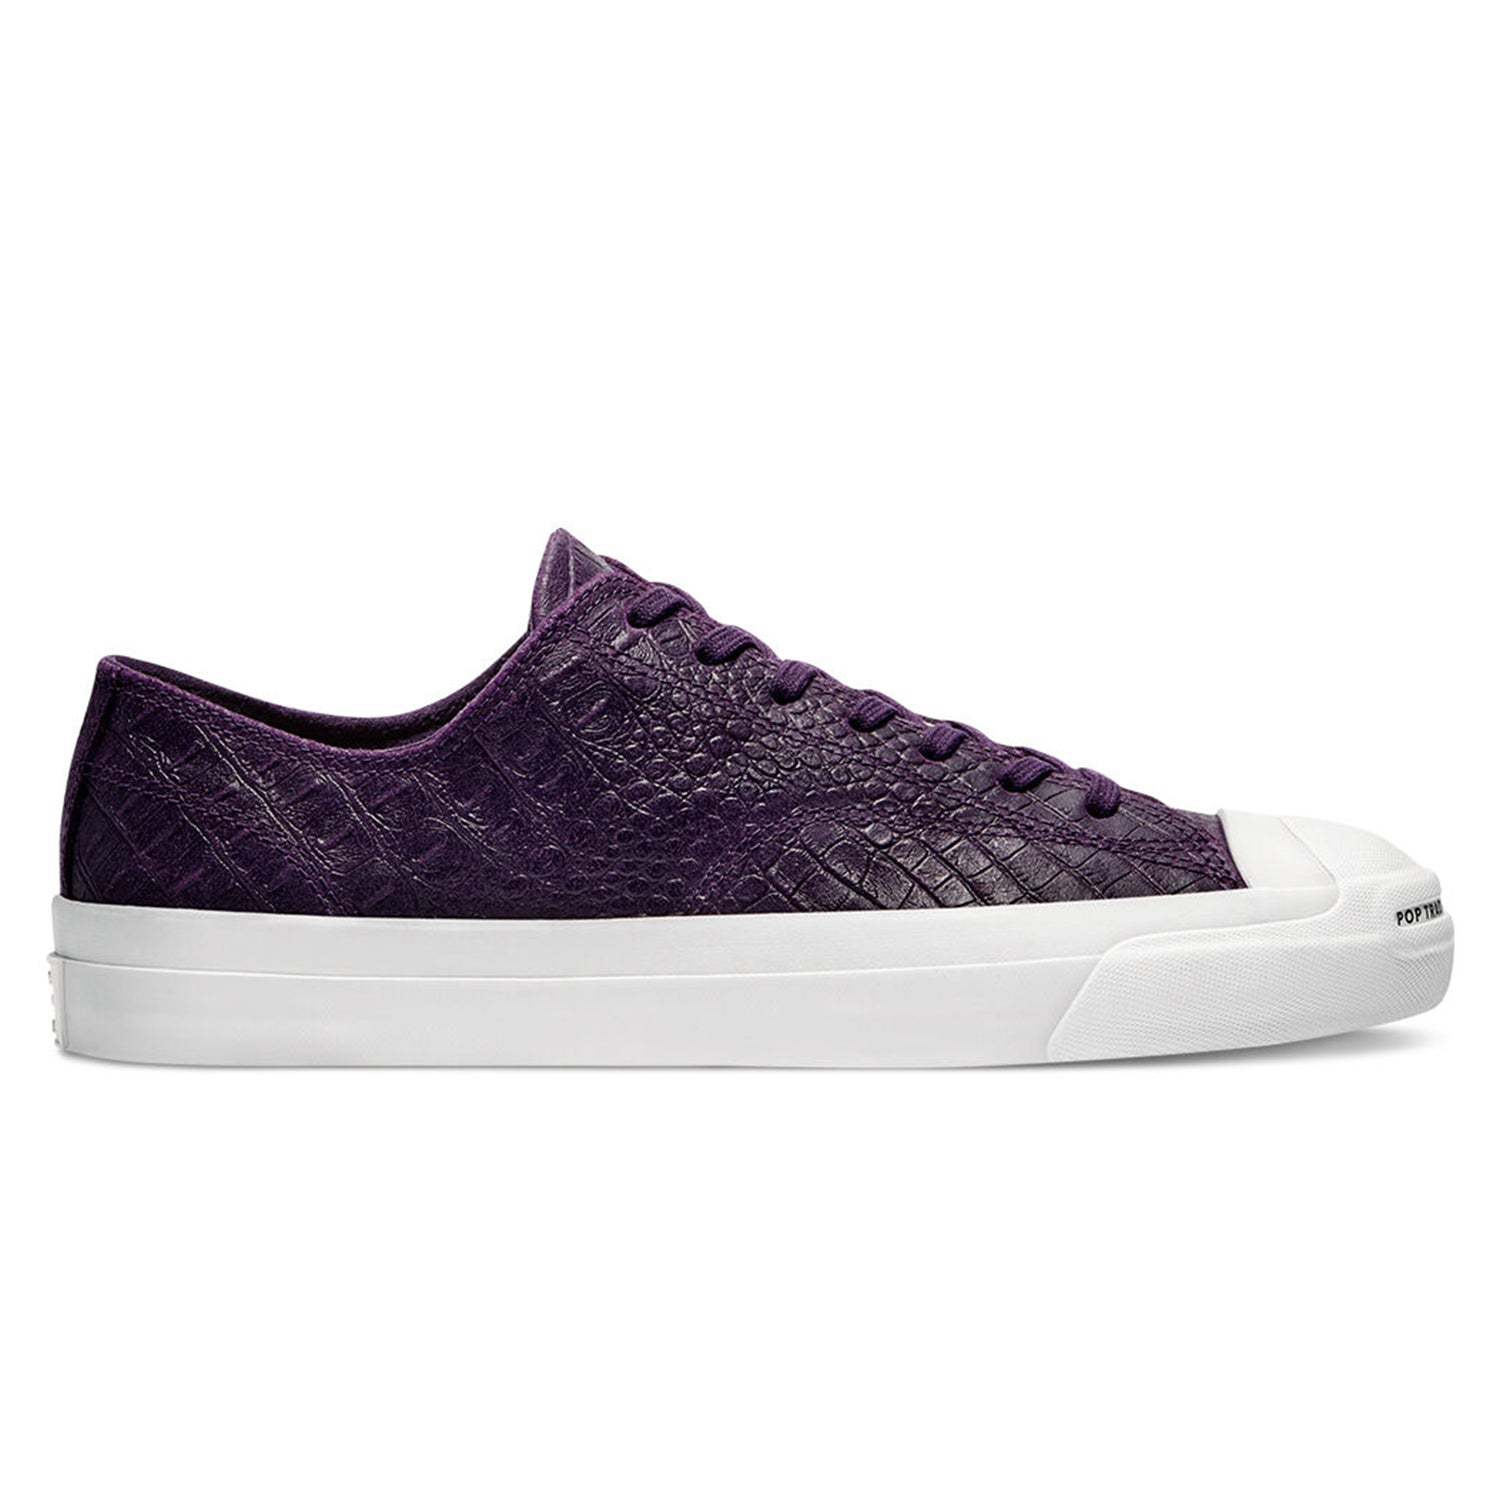 Converse CONS x Pop Trading Jack Purcell Pro OX Grand Purple